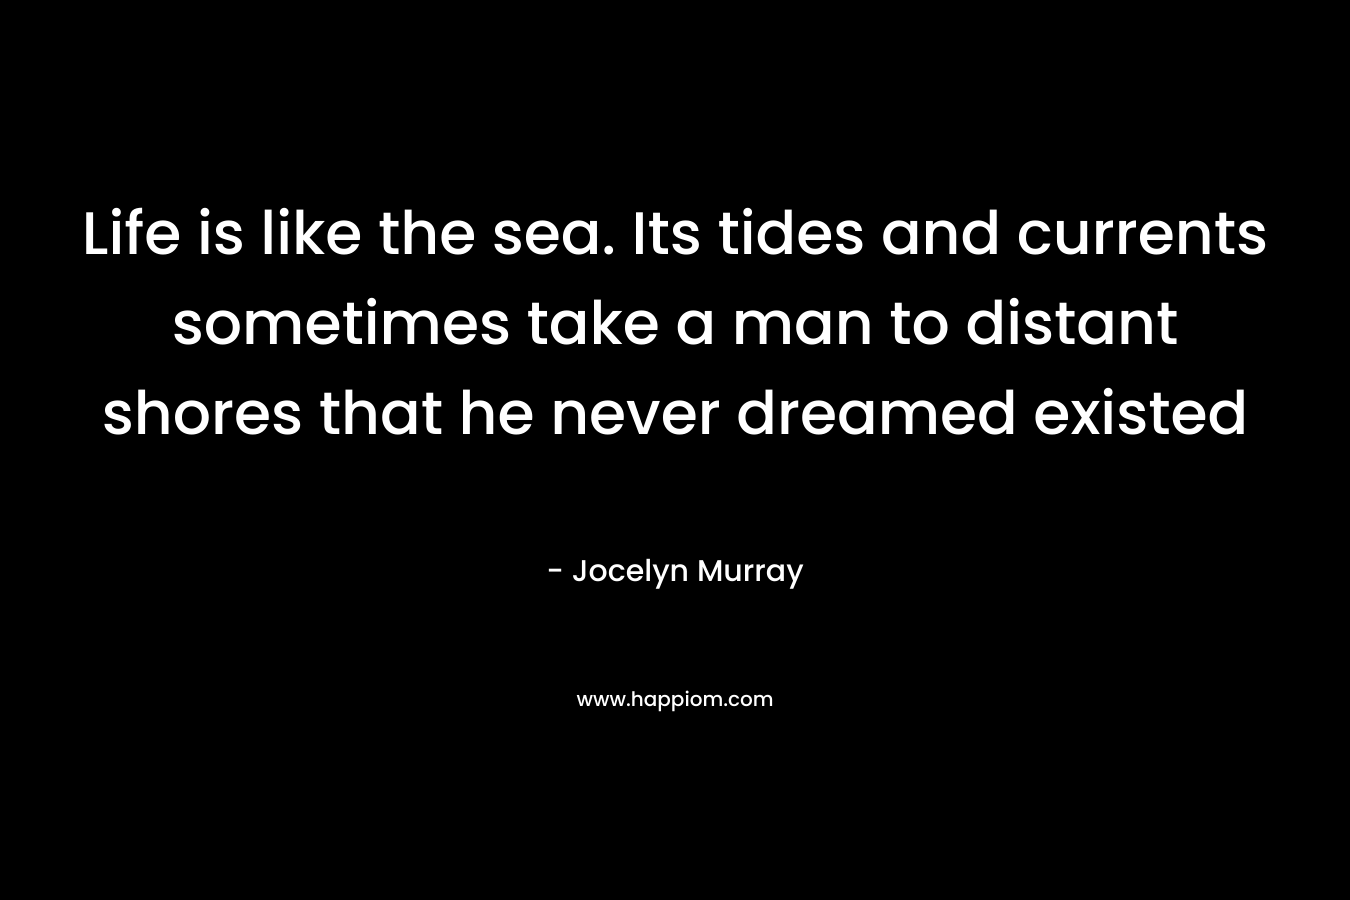 Life is like the sea. Its tides and currents sometimes take a man to distant shores that he never dreamed existed